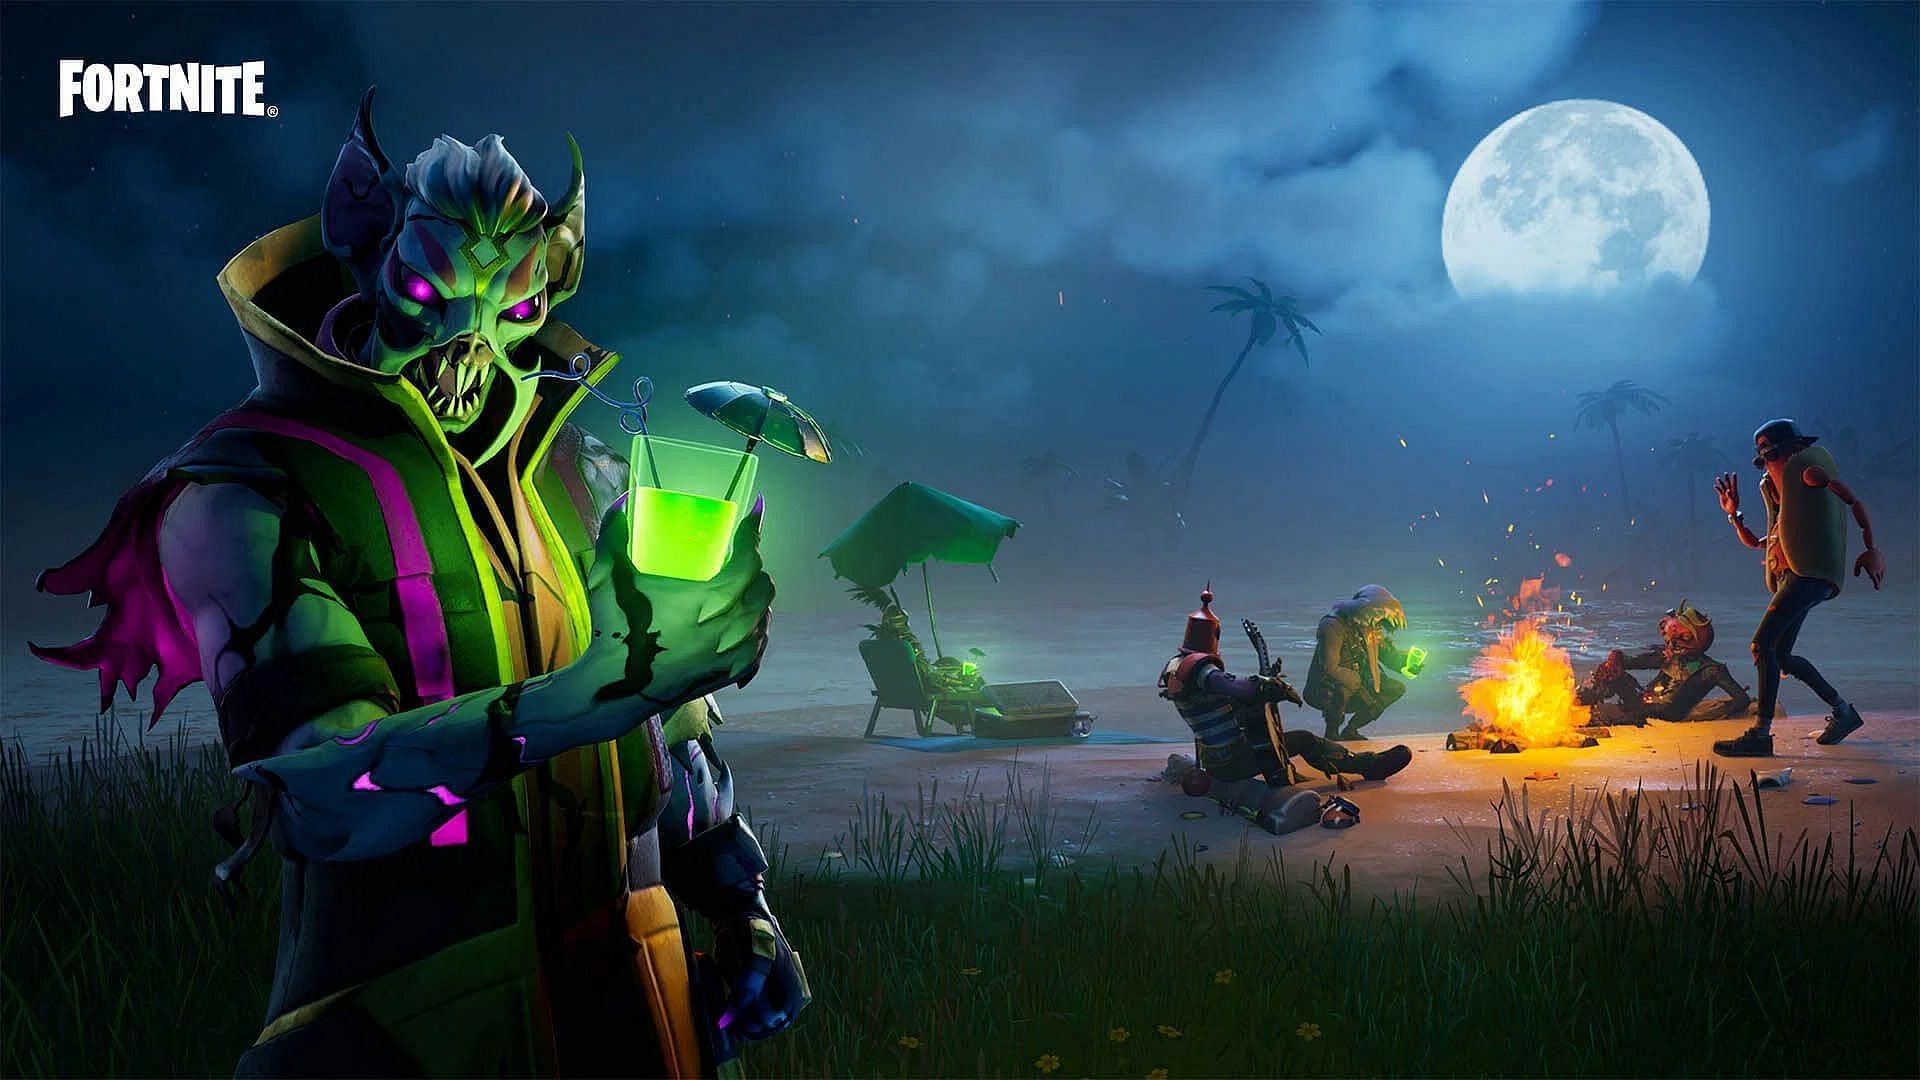 Many new Fortnitemares 2022 skins will be released to the game in October (Image via Epic Games)